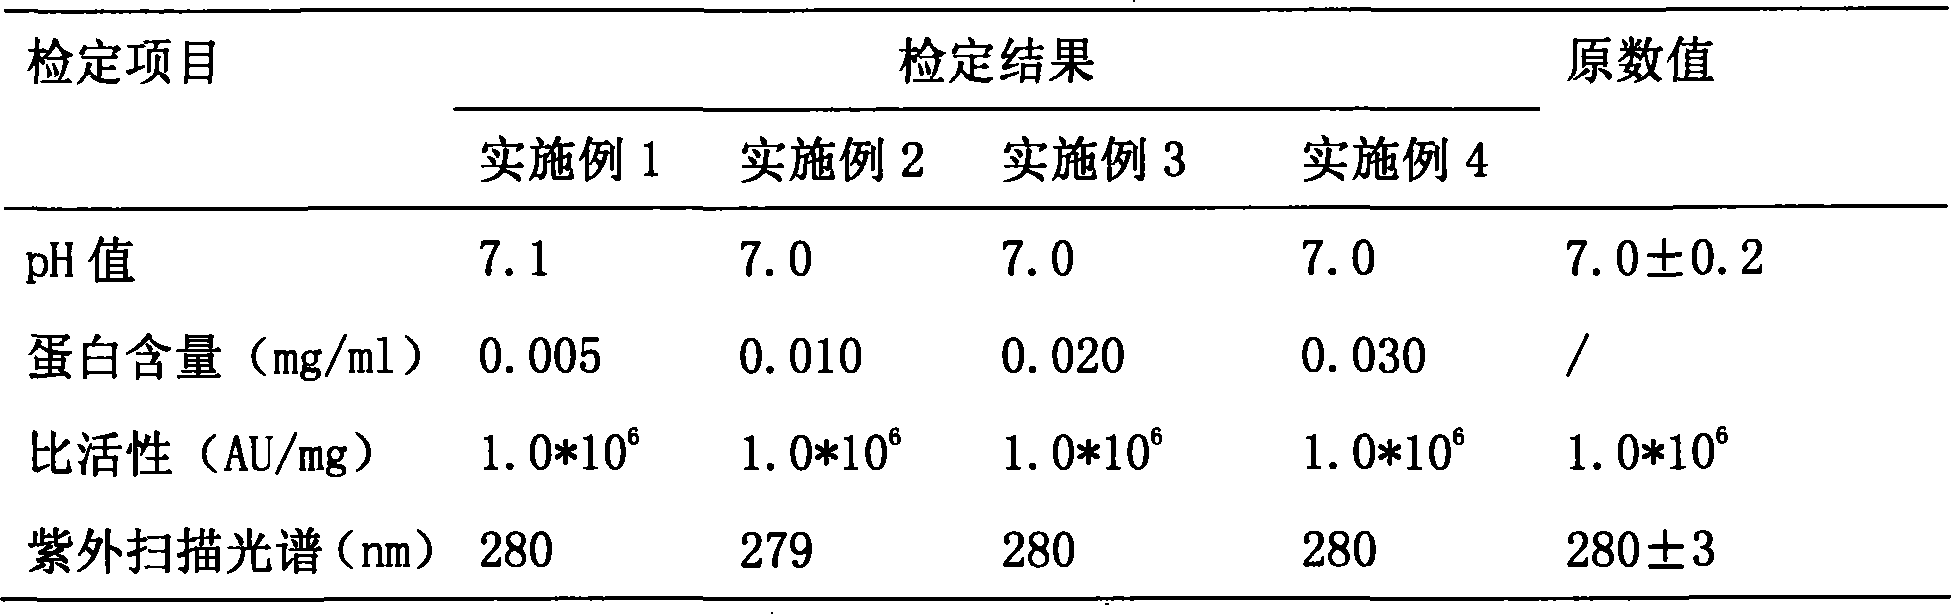 Method for preparing mouse nerve growth factor and method for preparing mouse nerve growth factor for injection